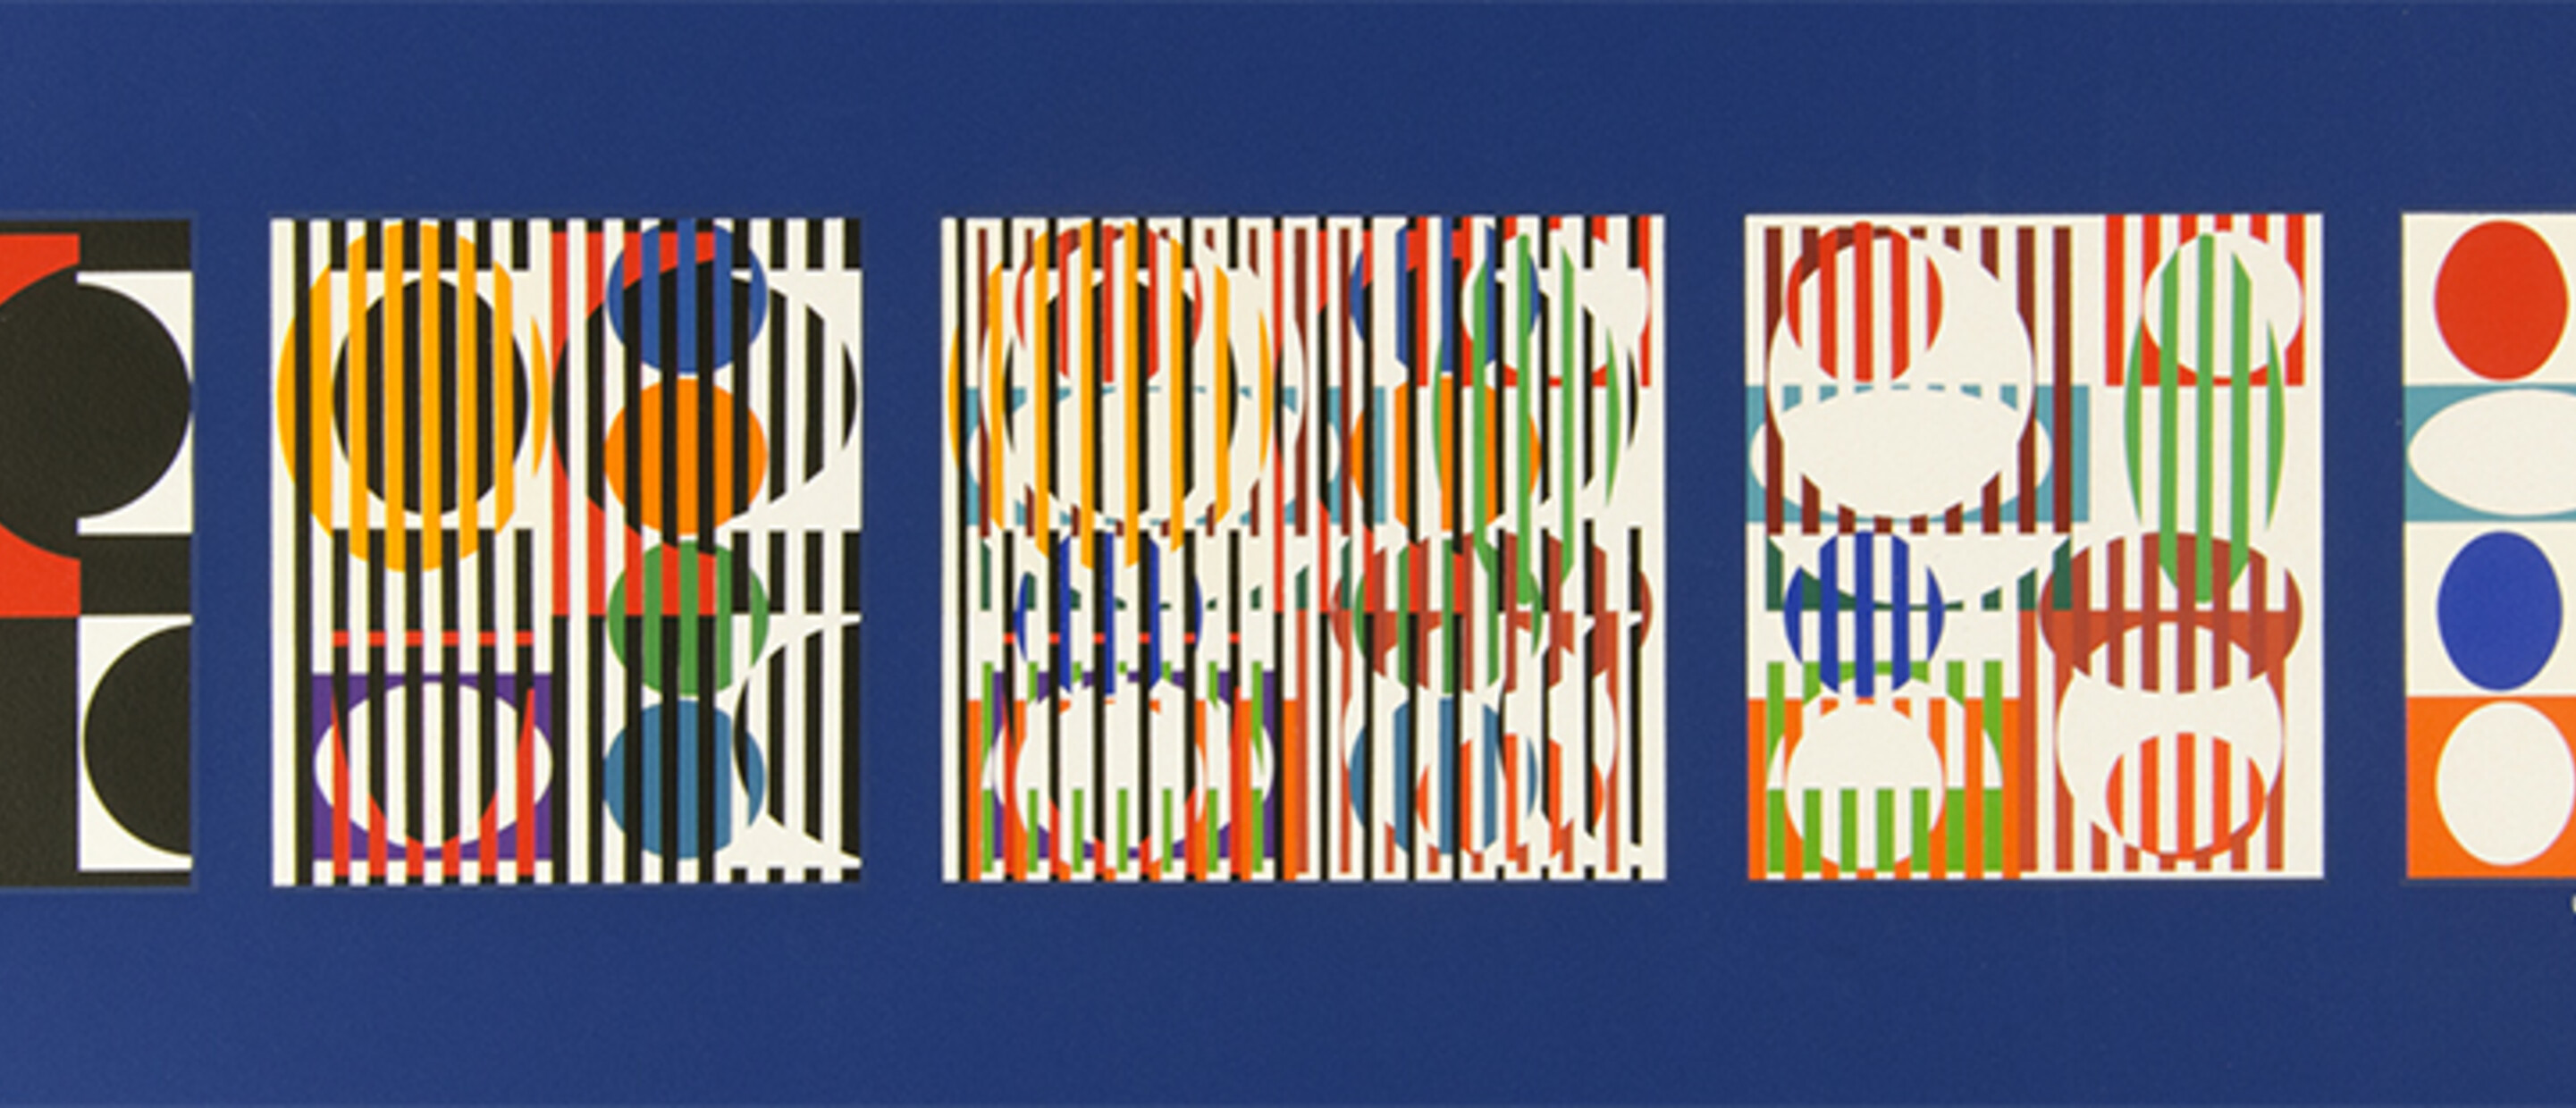 Yaacov Agam, Five Movements, 1973, Serigraph on paper, 21 7/8 x 31 7/8 in. Pomona College Collection. Gift of the C.E. Merrill Trust.